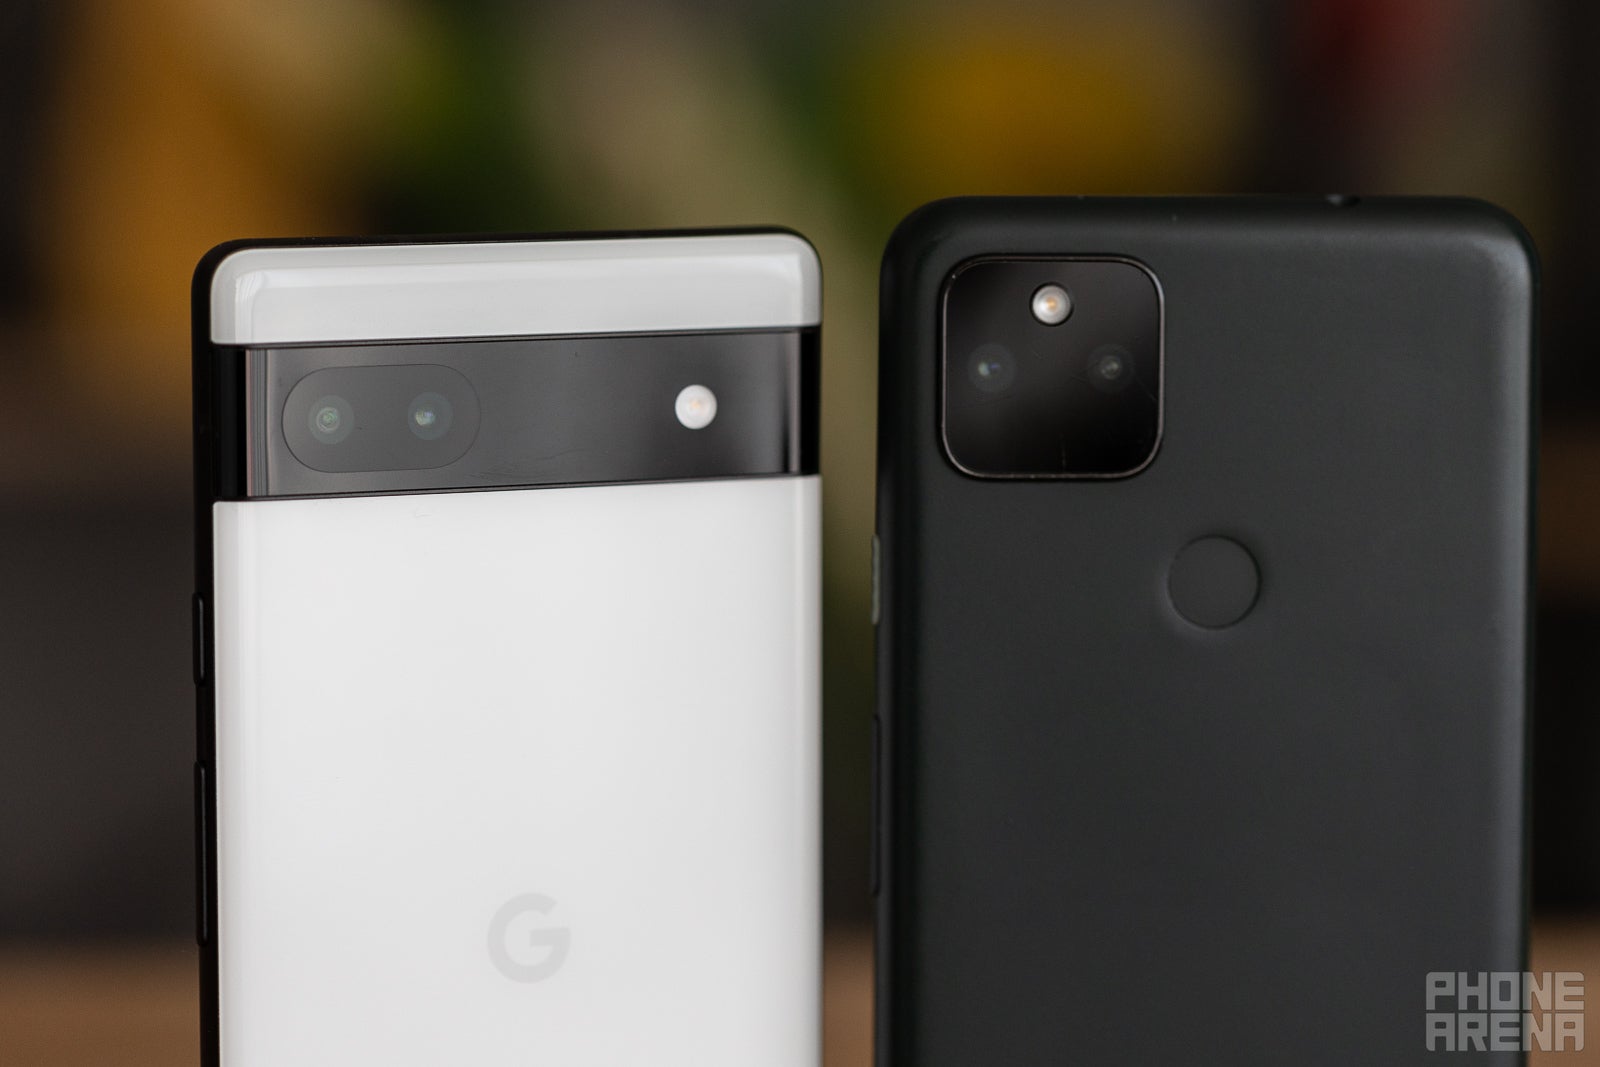 The Pixel 6a&#039;s horizontal camera module (left) and Pixel 5a&#039;s square one (right) - Google Pixel 6a vs Pixel 5a comparison: Twice the performance!